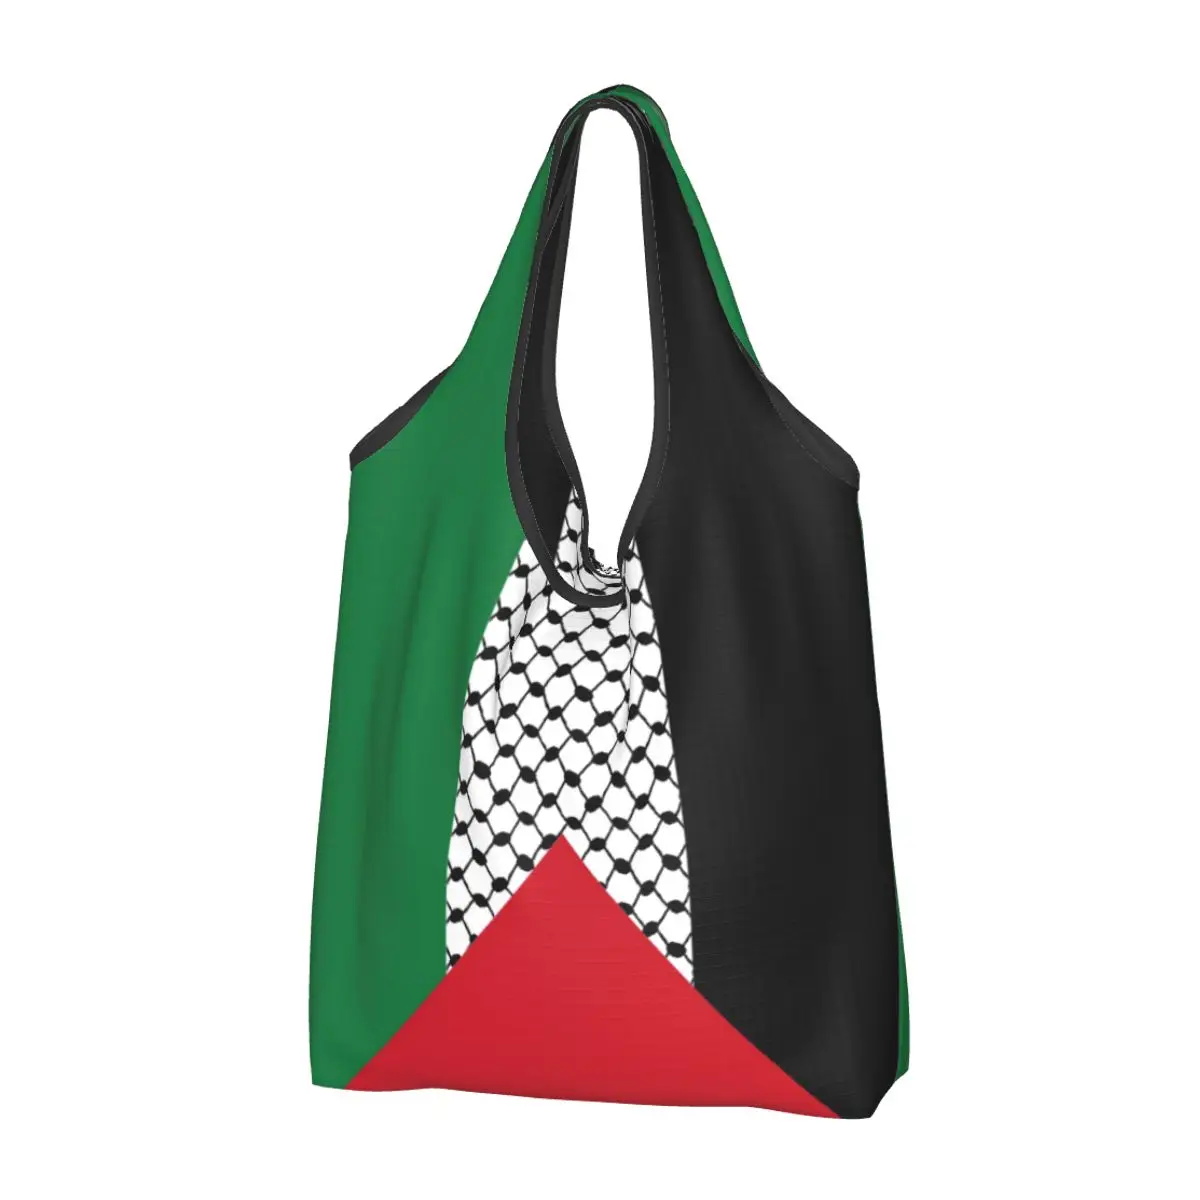 

Palestine Flag Grocery Bags Durable Large Reusable Recycle Foldable Palestinian Hatta Kufiya Shopping Tote Bag Washable